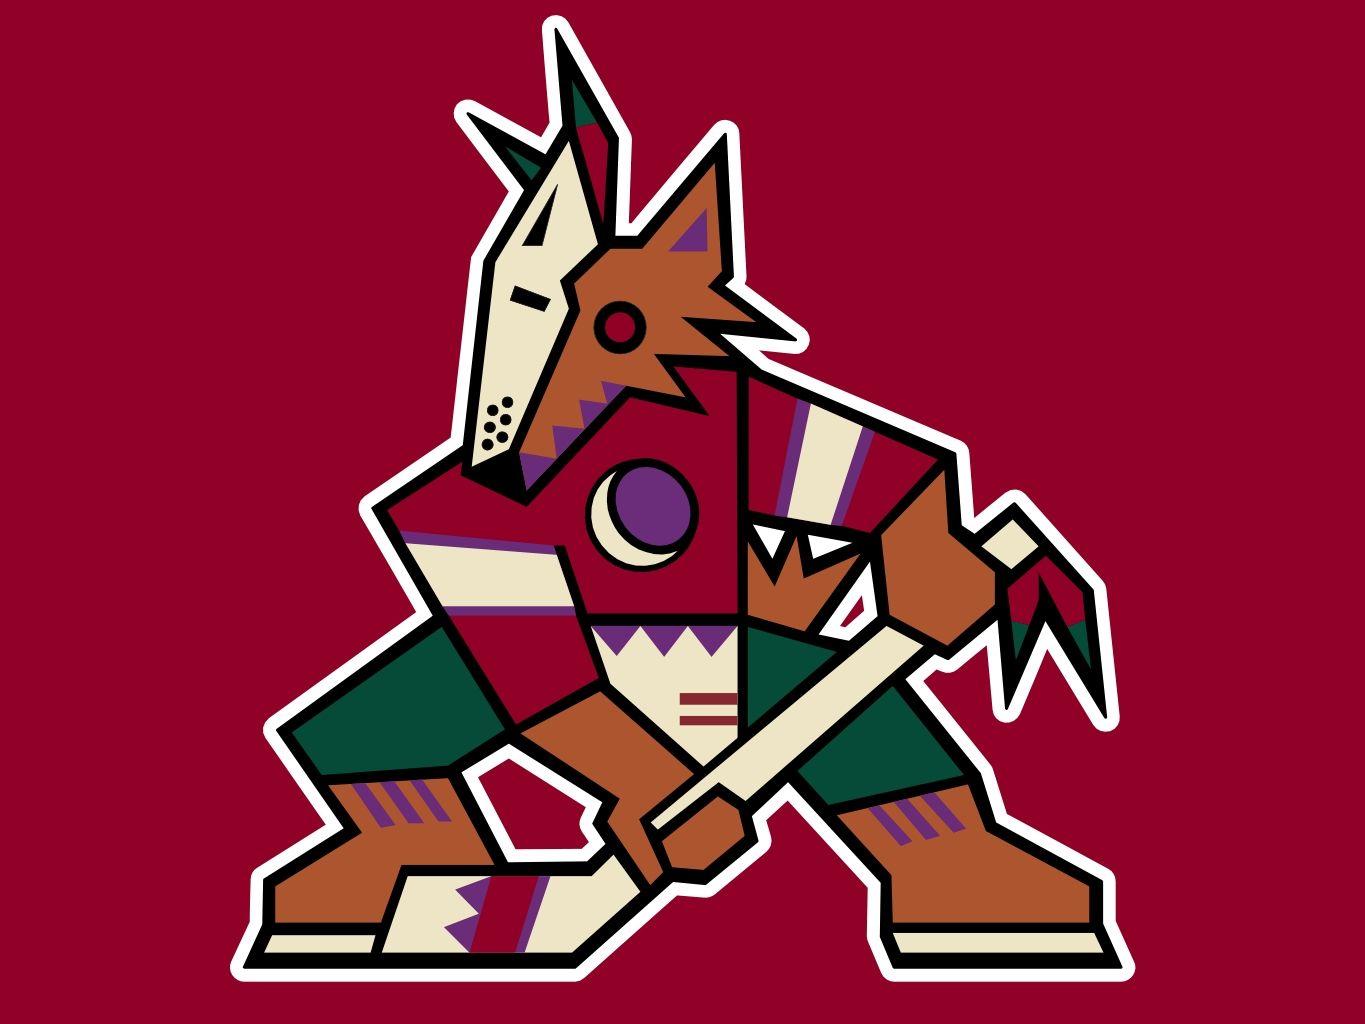 Coyotes Logo - How Do You View the Old Phoenix Coyotes Logo? Is It A Profile View ...